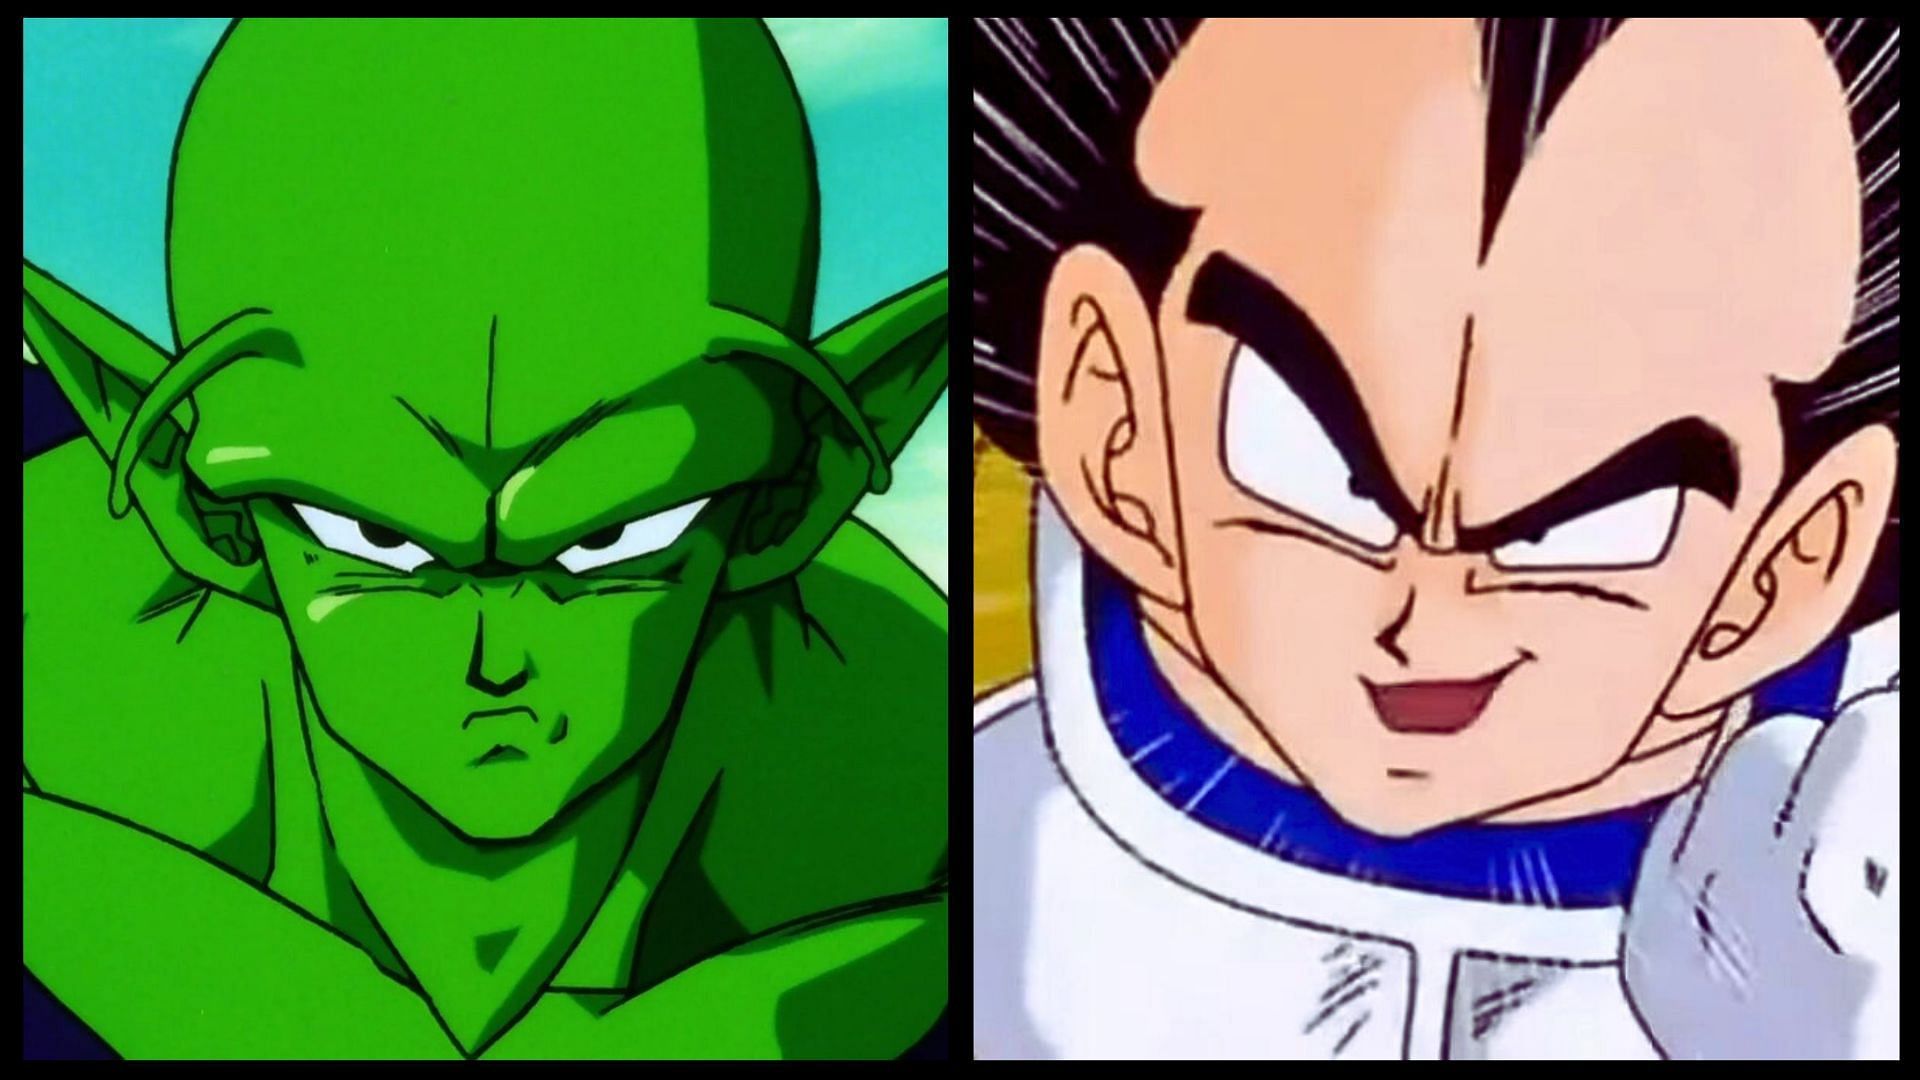 Dragon Ball fans realize these two ex-antagonists have more in common than VAs